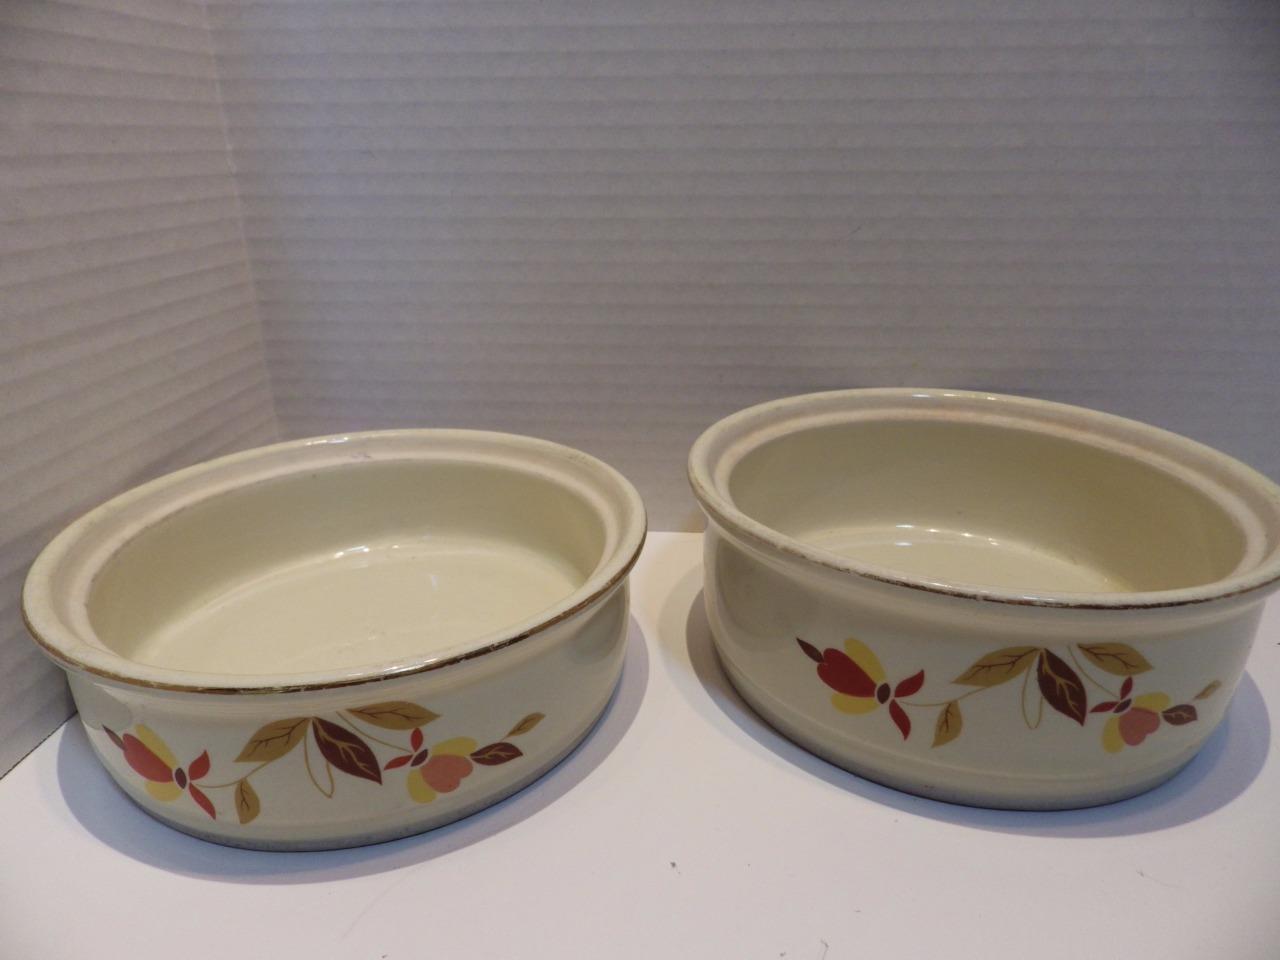 Primary image for (2) Jewel Tea Autumn Leaf Stacking Bowls Hall China